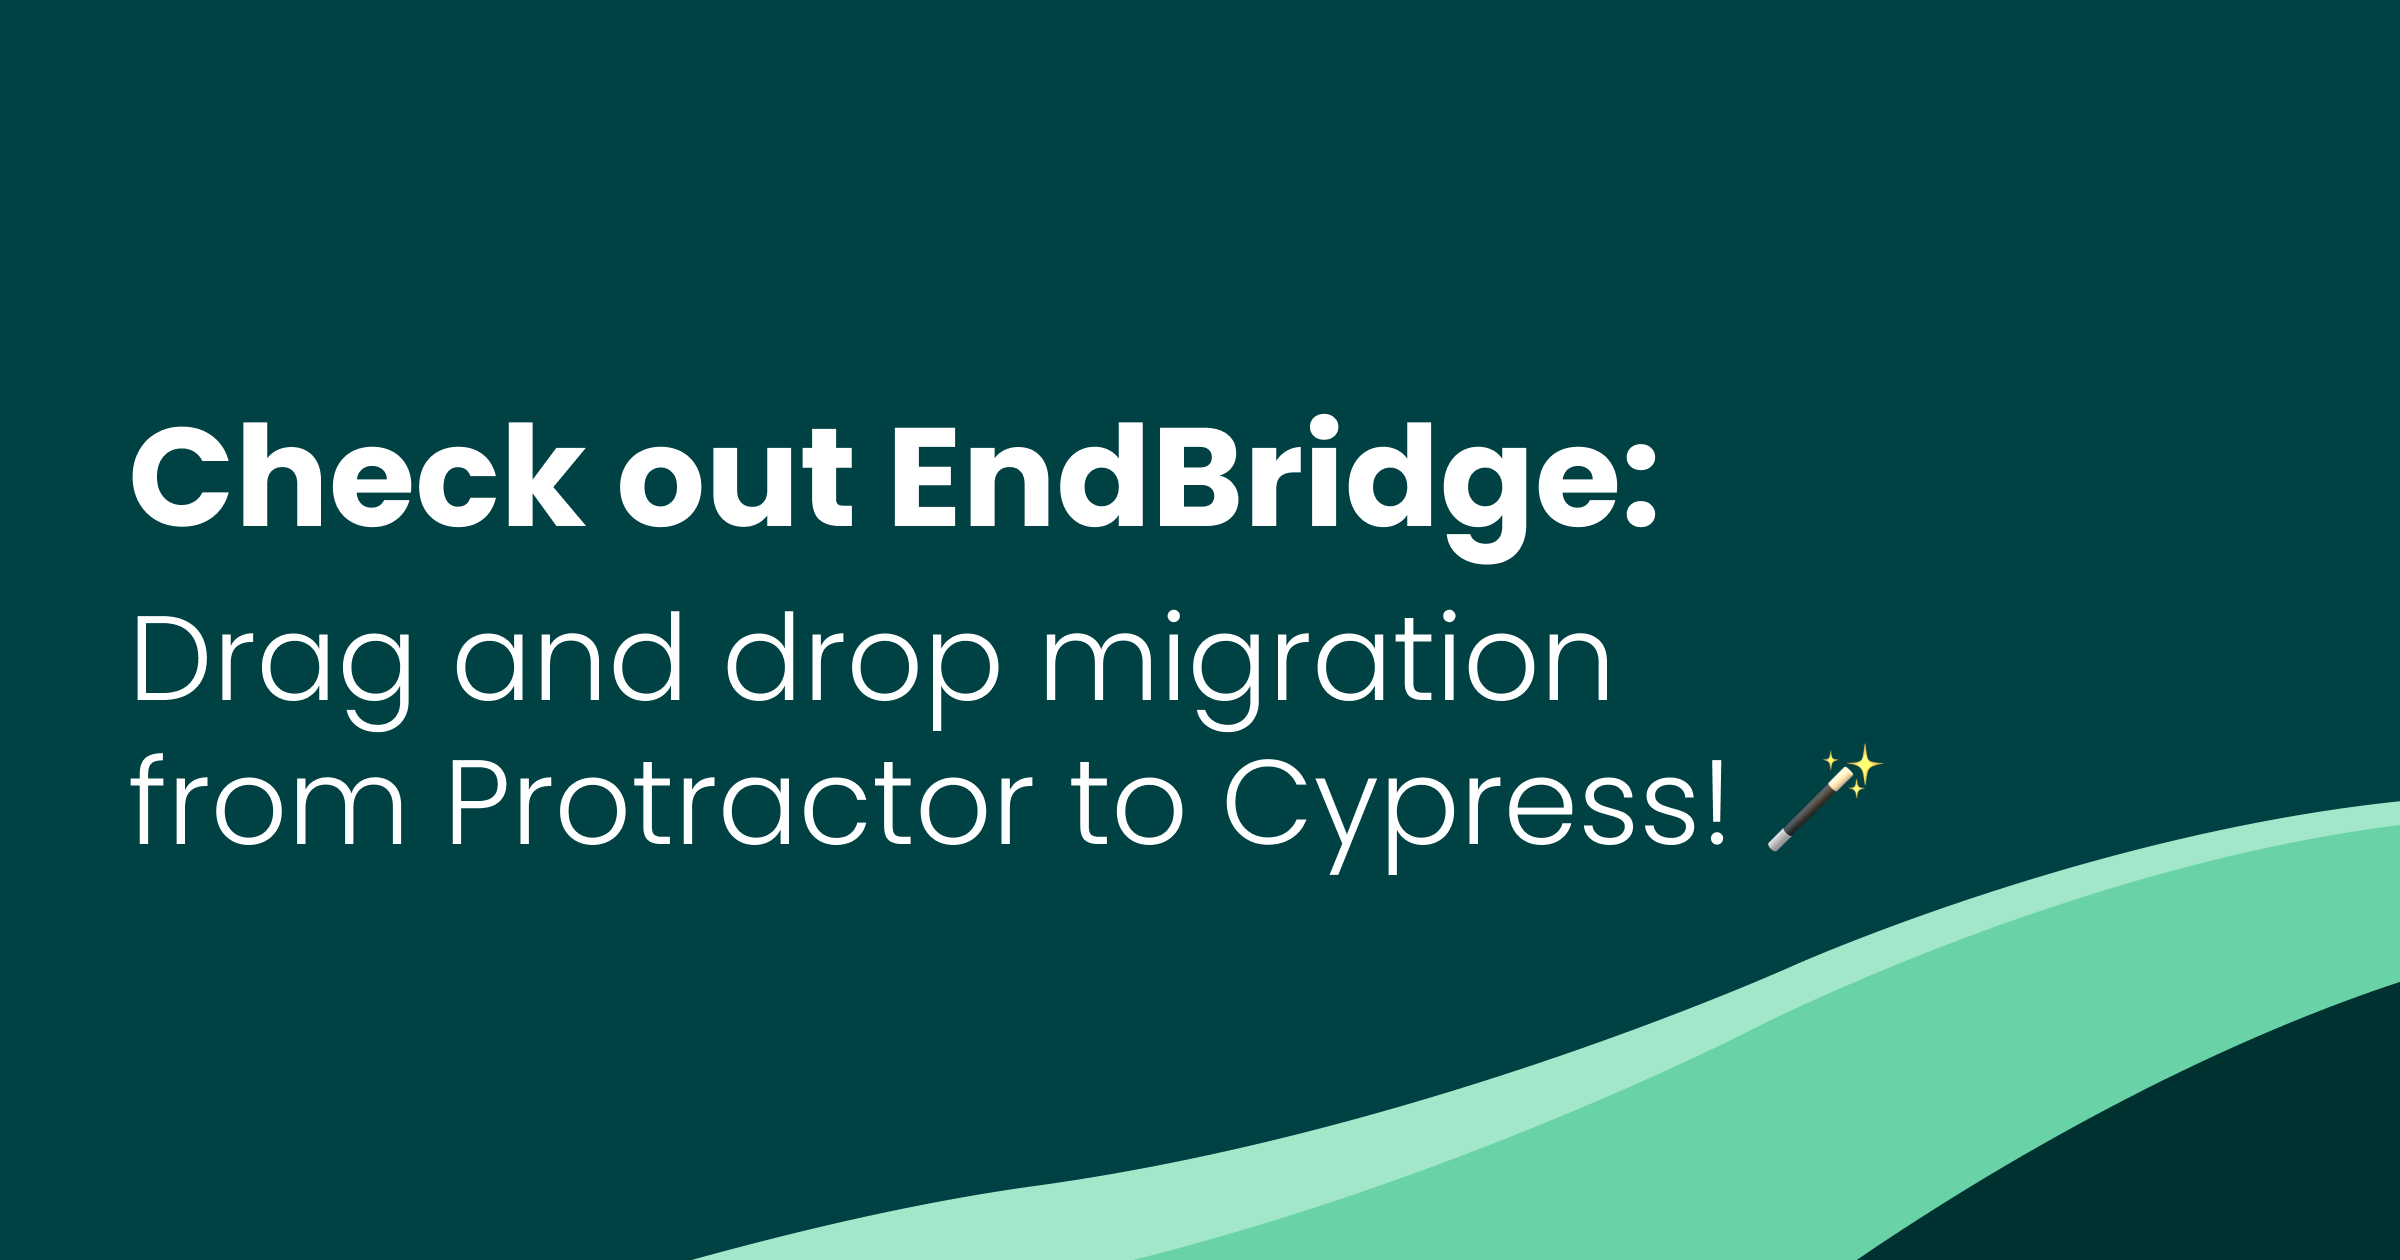 Check out EndBridge: Drag and drop migration from Protractor to Cypress!